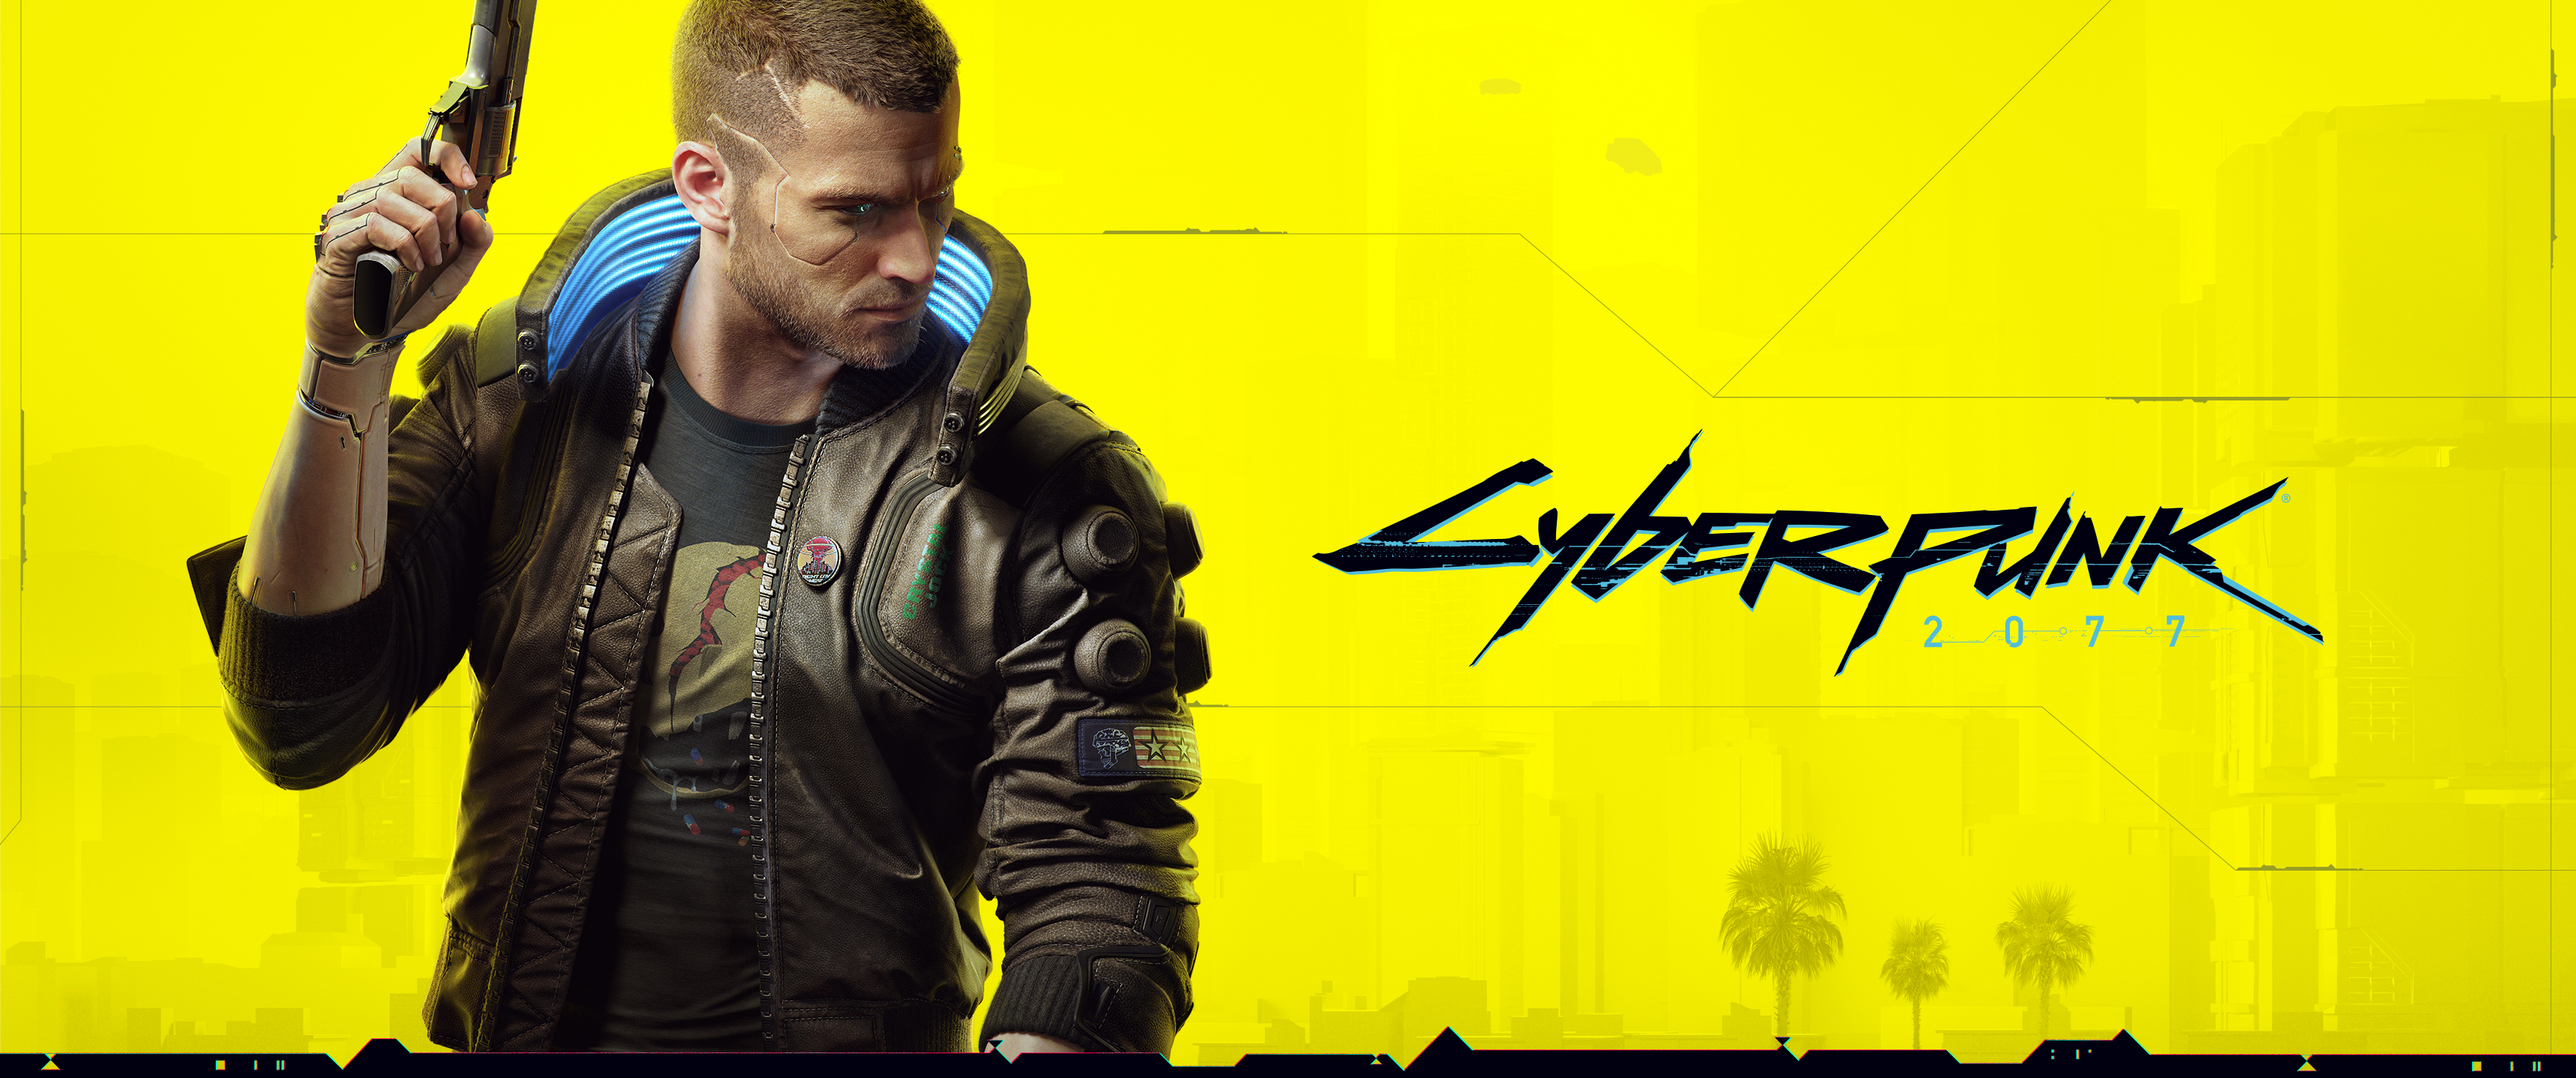 Cyberpunk 2077 Game Poster Yellow Background Simple Background Weapon Video Games PC Gaming 3440x1440